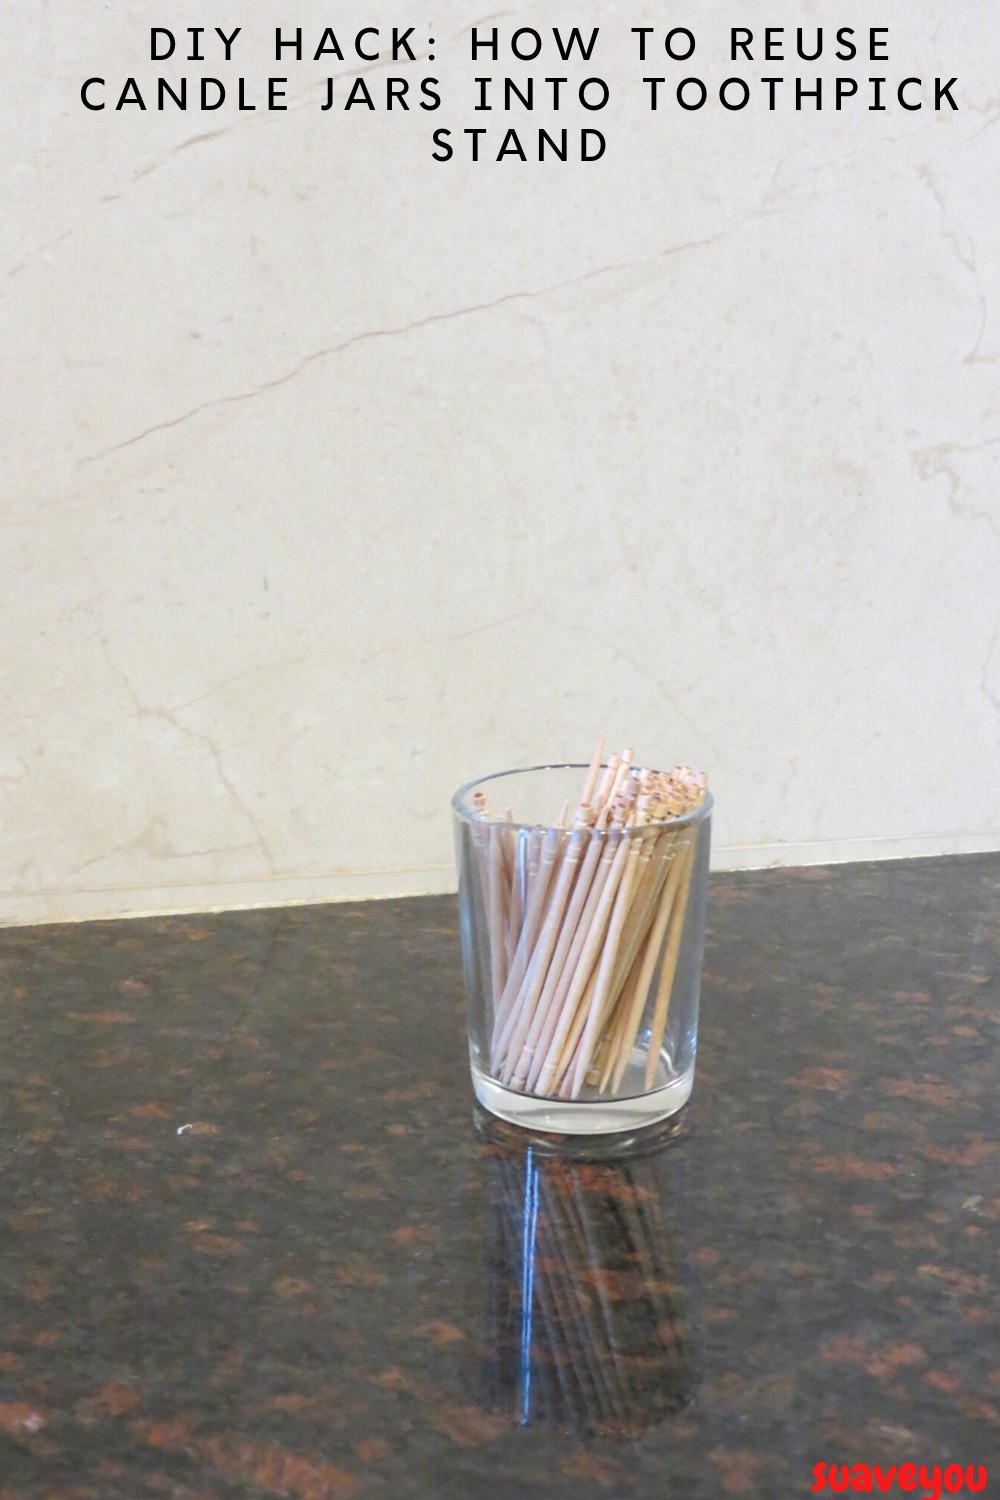 DIY Hack: How to Reuse Candle Jars Into Toothpick Stand